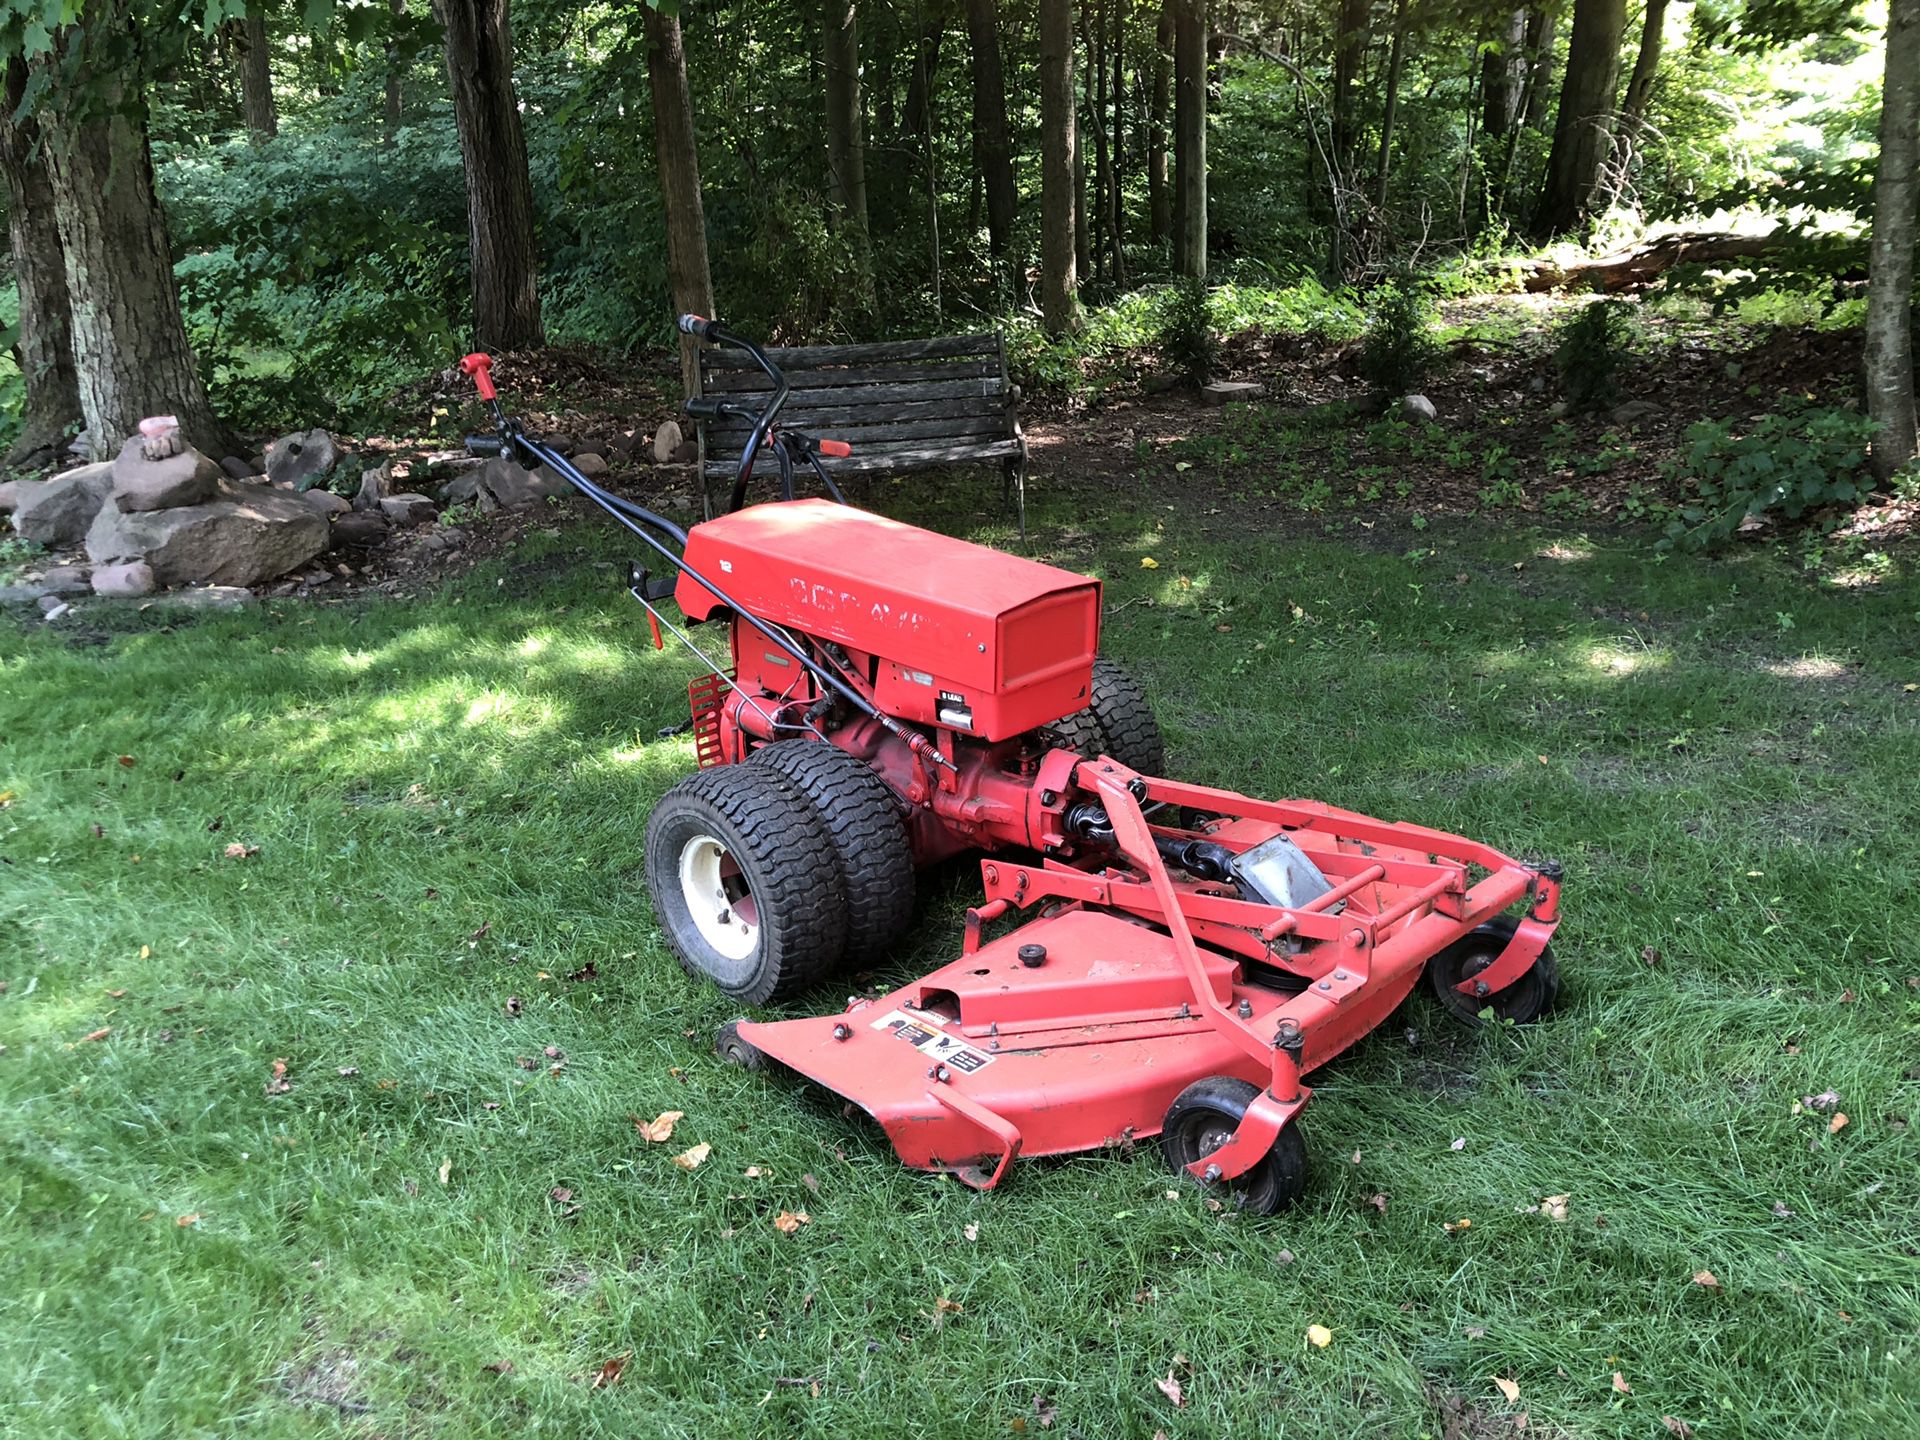 Gravely 12hp runs perfect If you can read this ad it’s still available